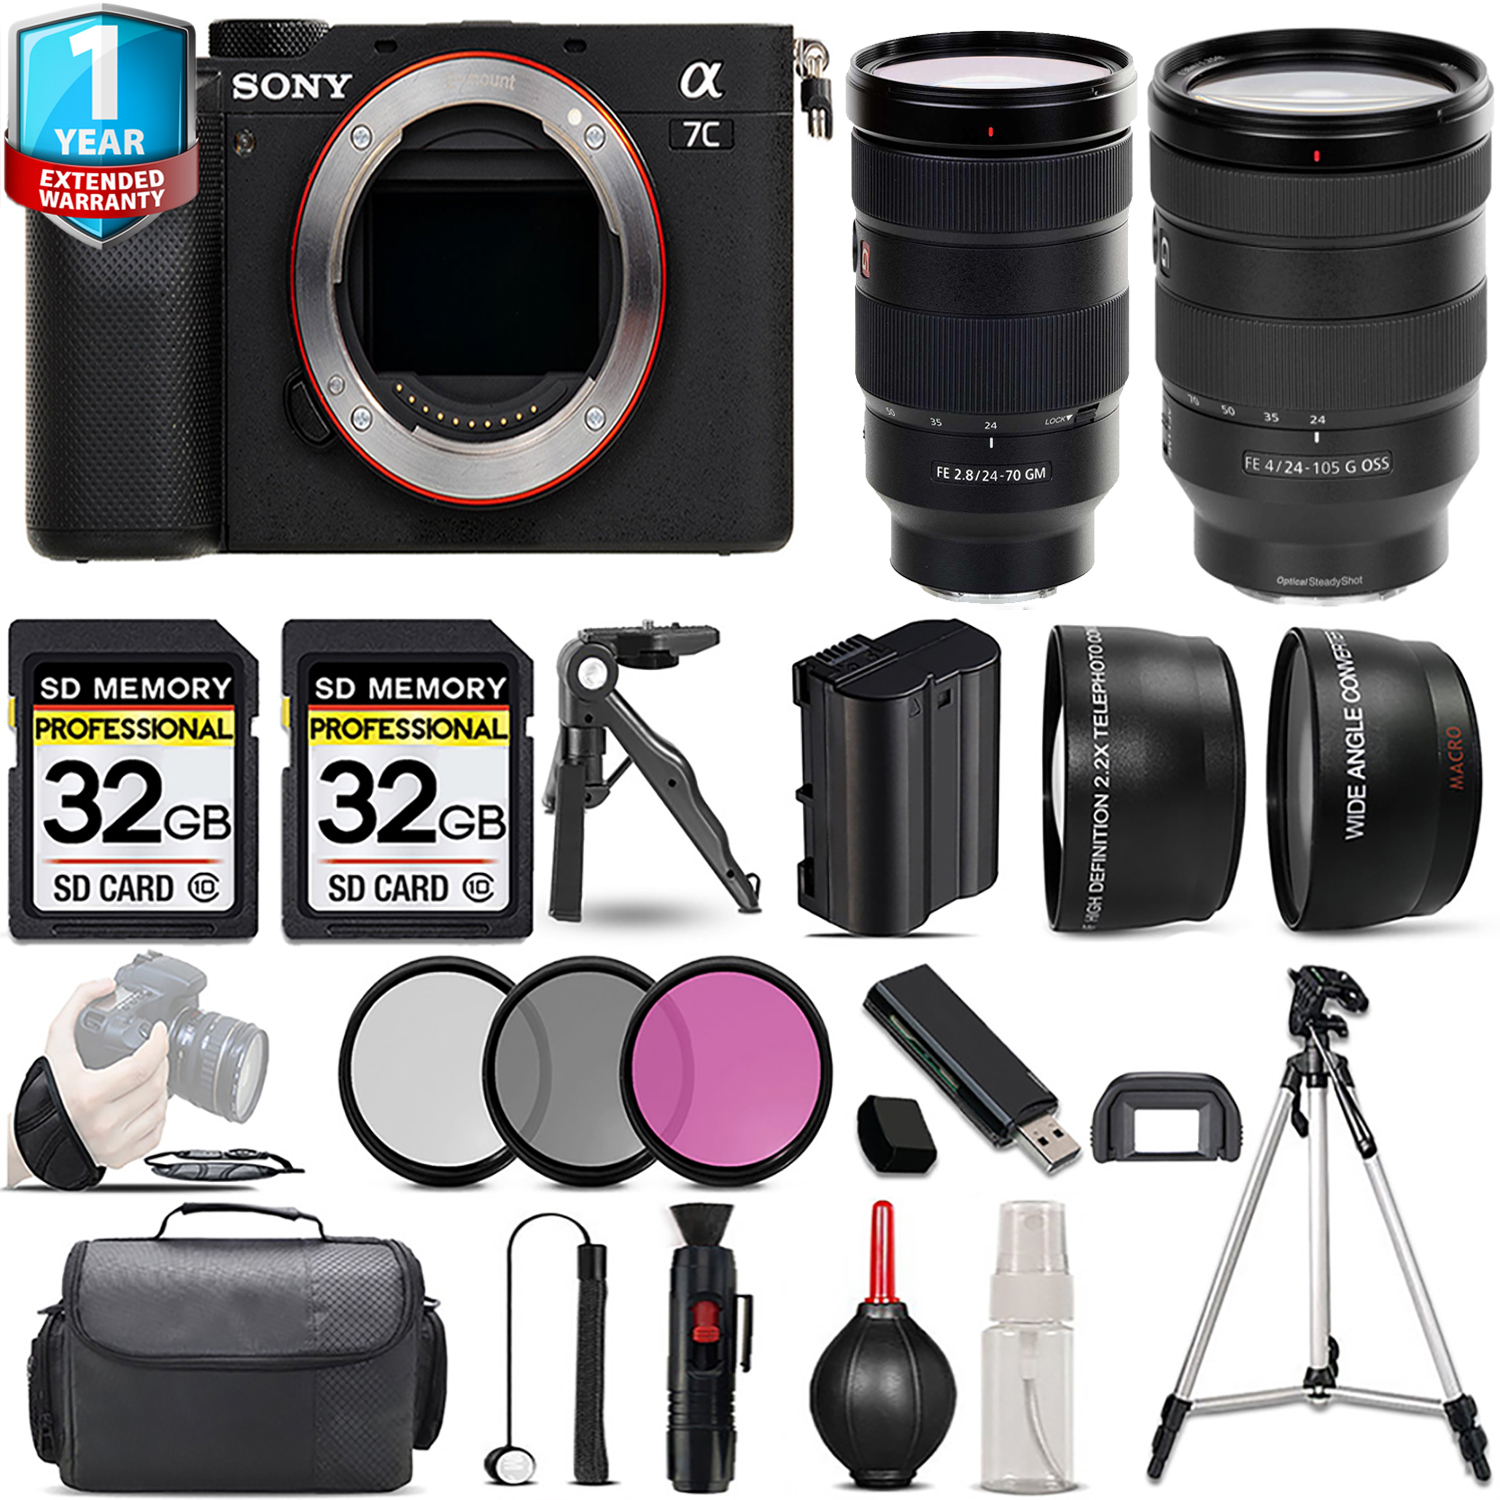 Alpha a7C Camera (Silver) + 70- 300mm Lens + 24-70mm Lens + 1 Year Extended Warranty - Kit *FREE SHIPPING*